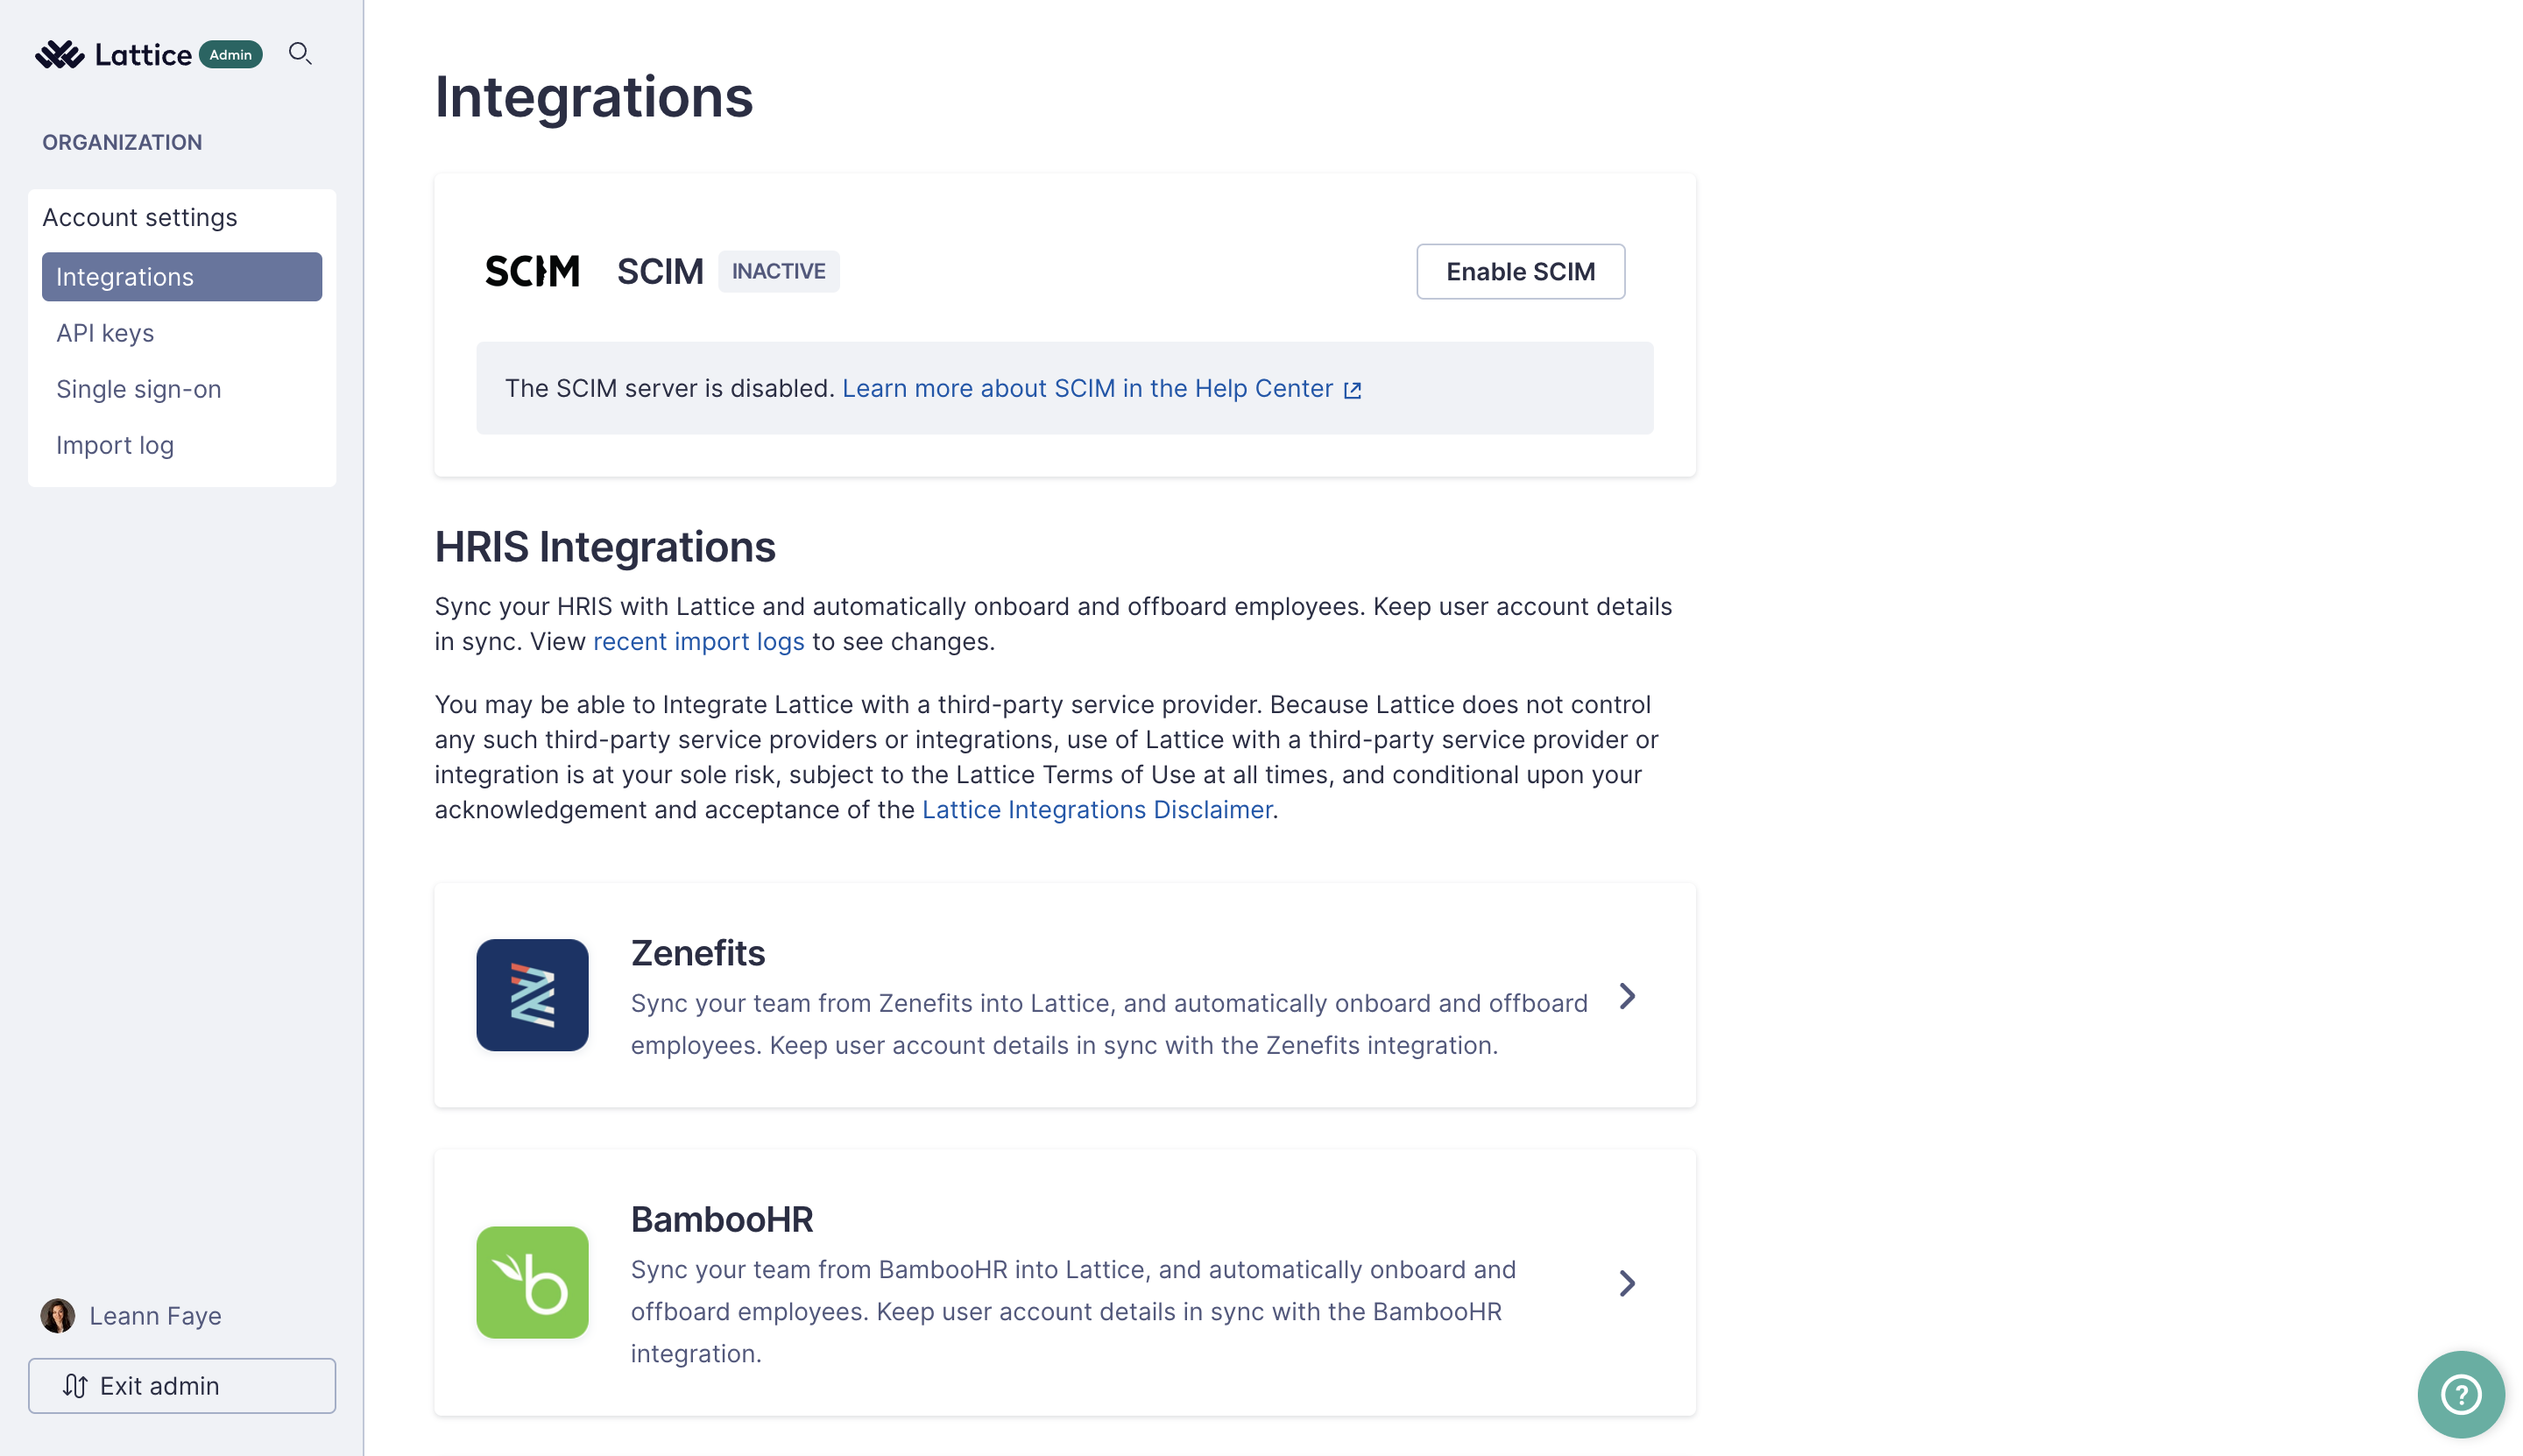 Example Integrations custom owner view. The page is opened to Integrations. On the lefthand admin navigation the following pages can be seen: Integrations, API keys, Single Sign-On, Import Log.